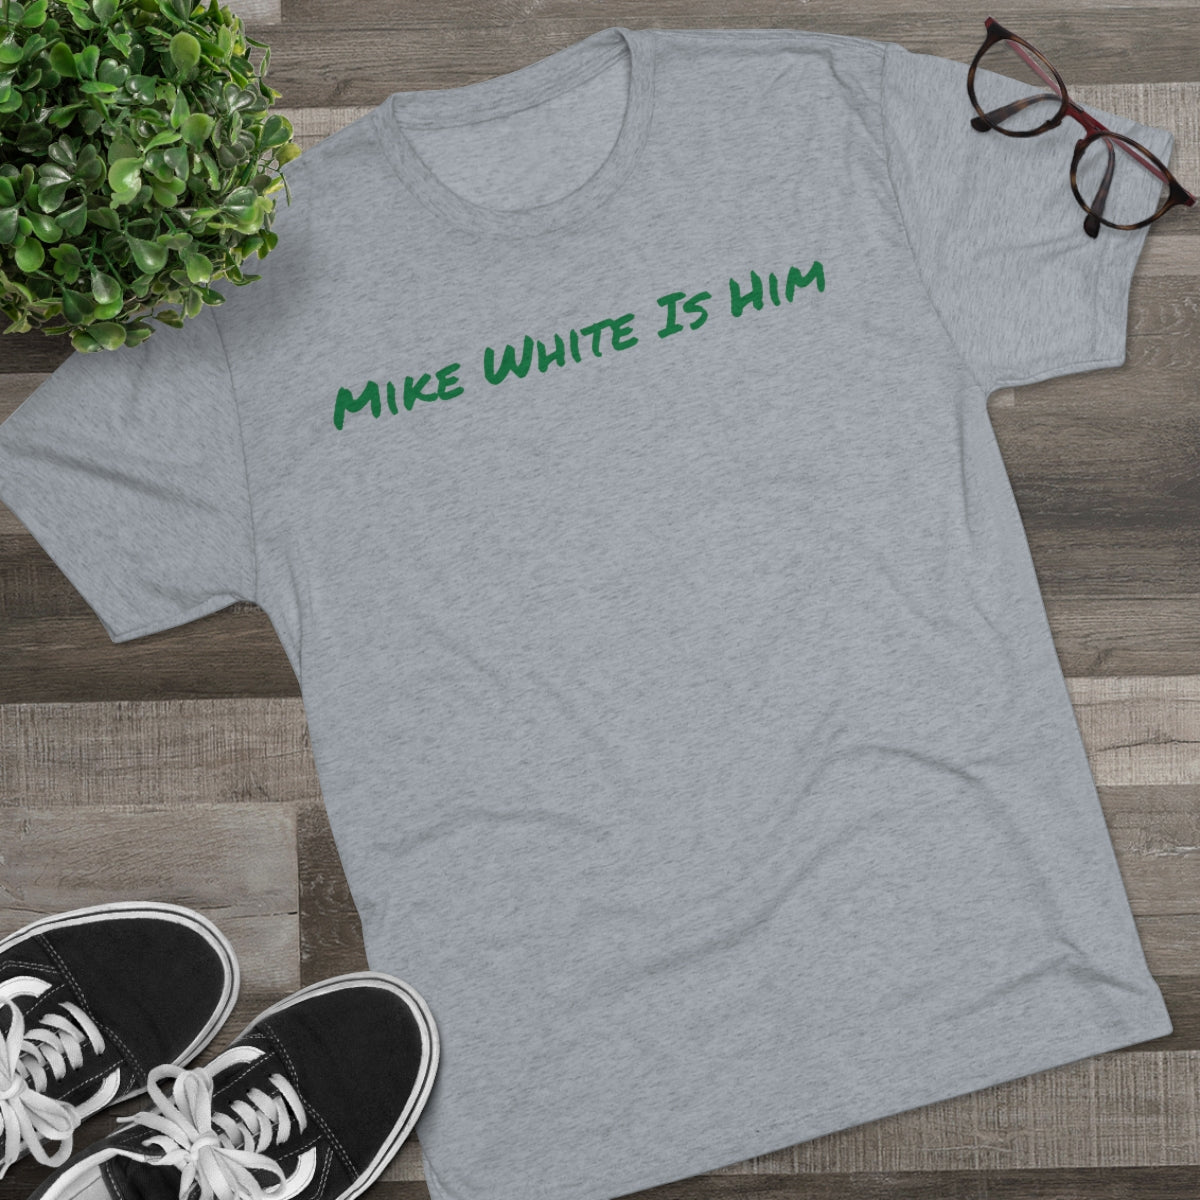 Mike White Is Him Shirt - IsGoodBrand